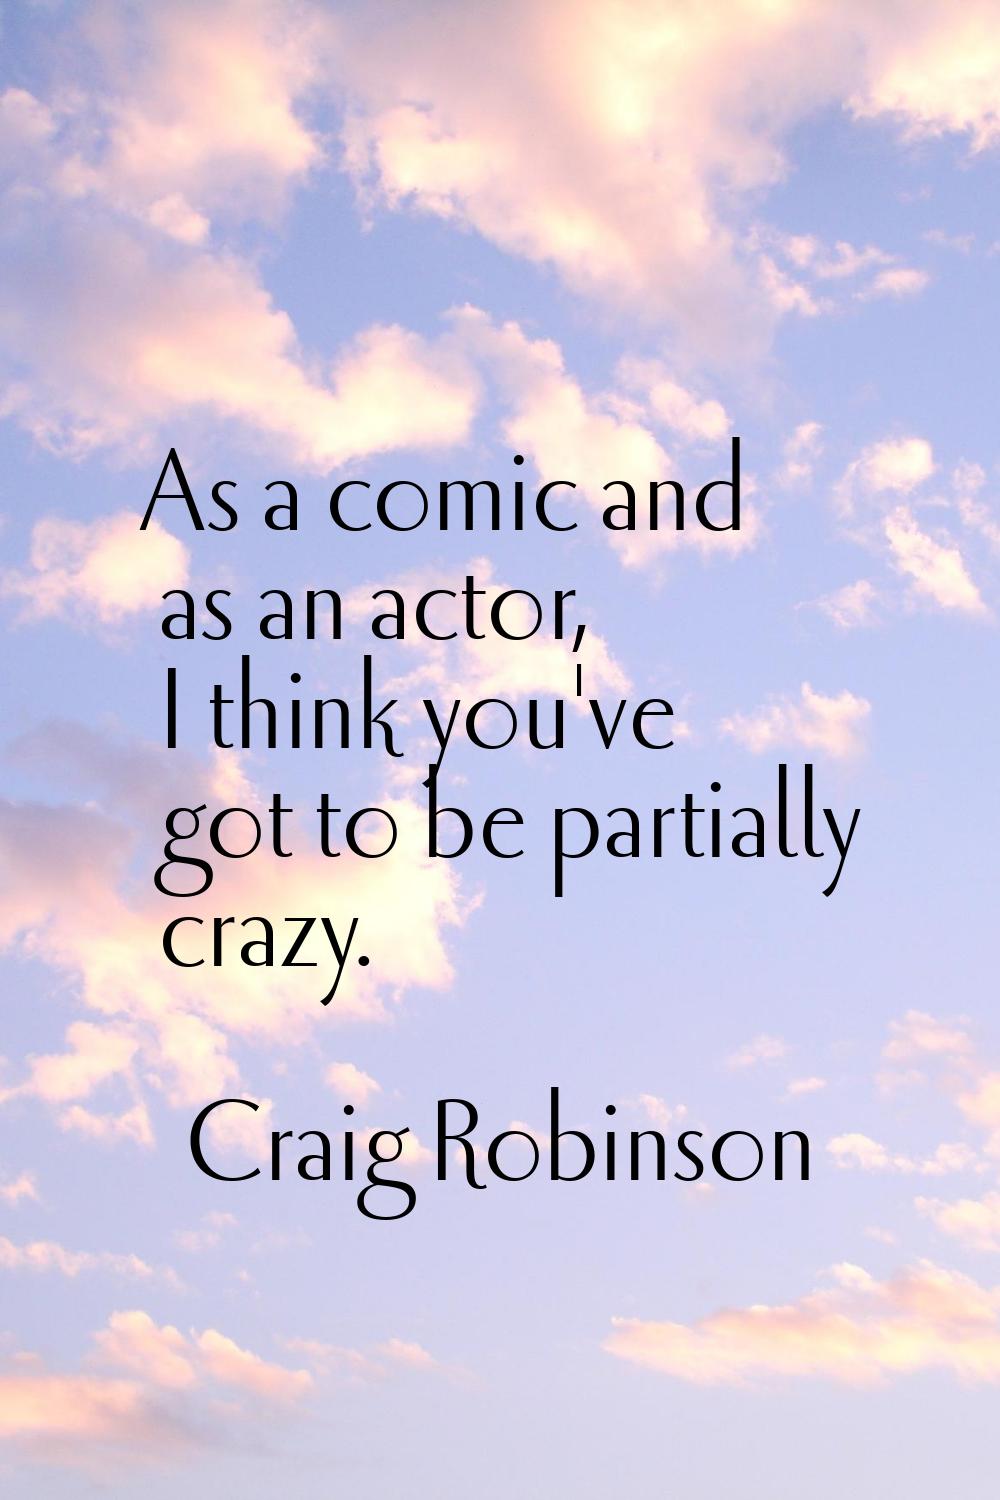 As a comic and as an actor, I think you've got to be partially crazy.